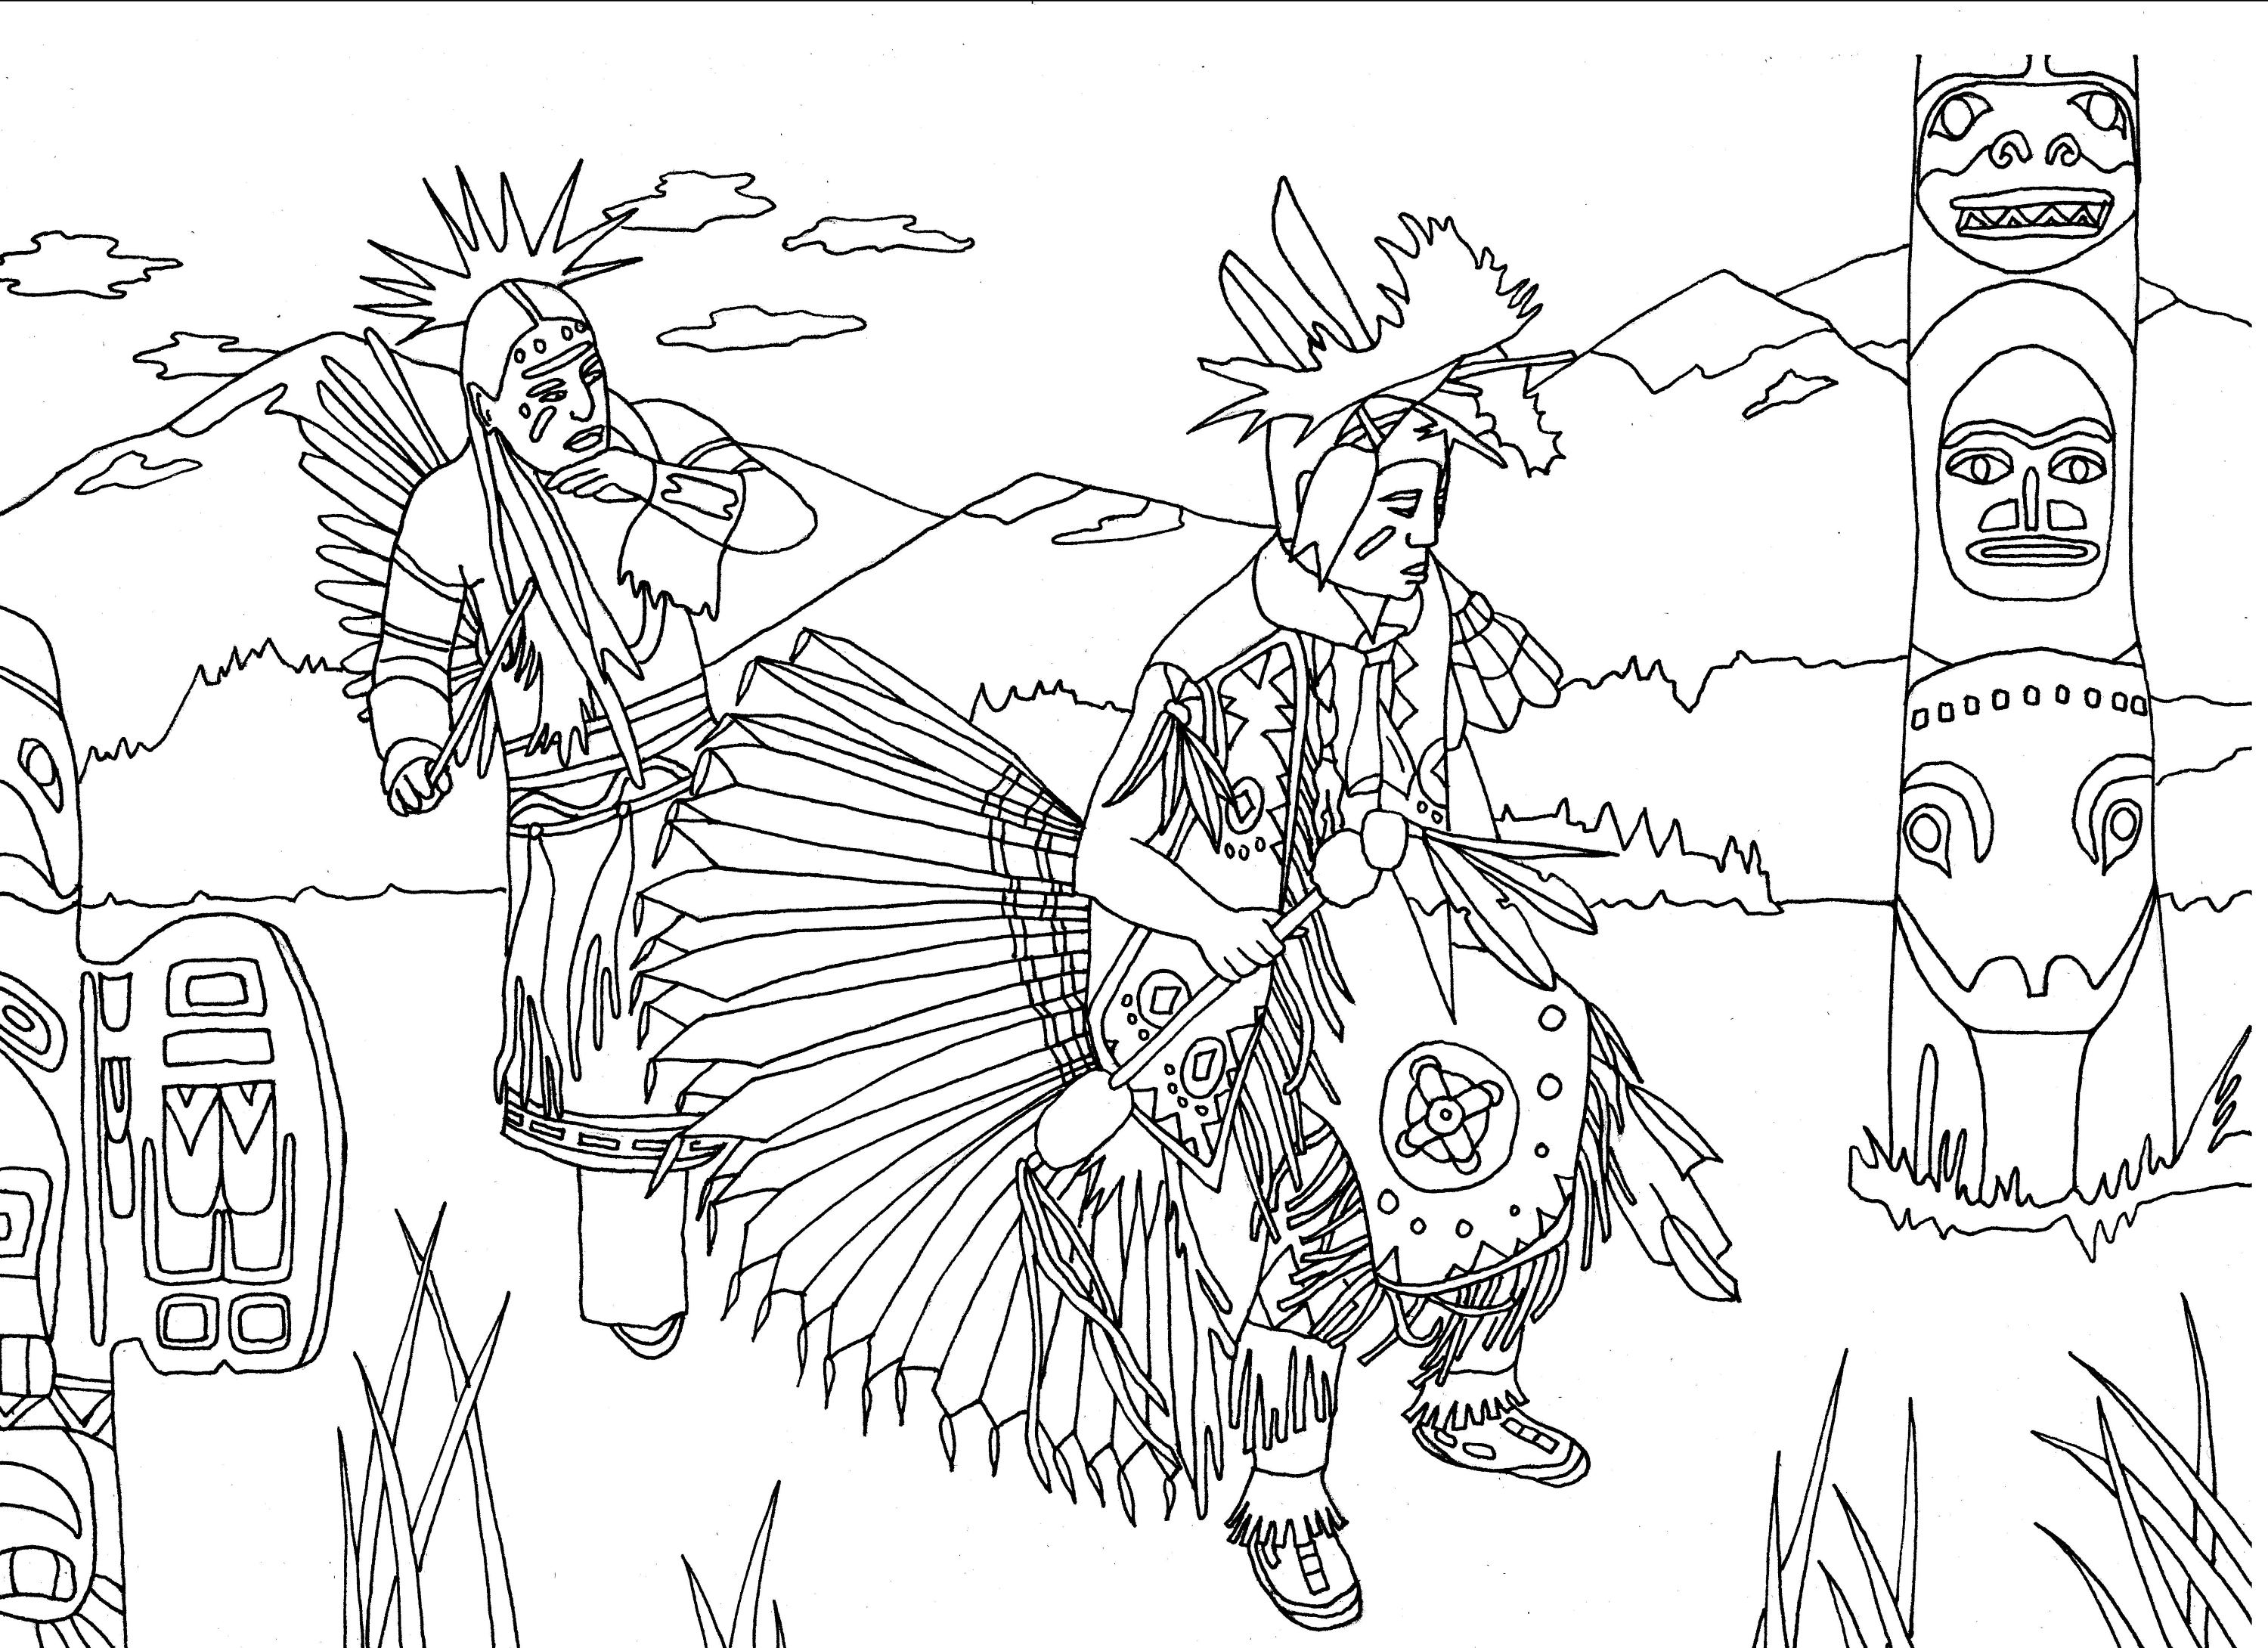 Dancing Coloring Page Native Americans Indians Dance Totem Native American Adult